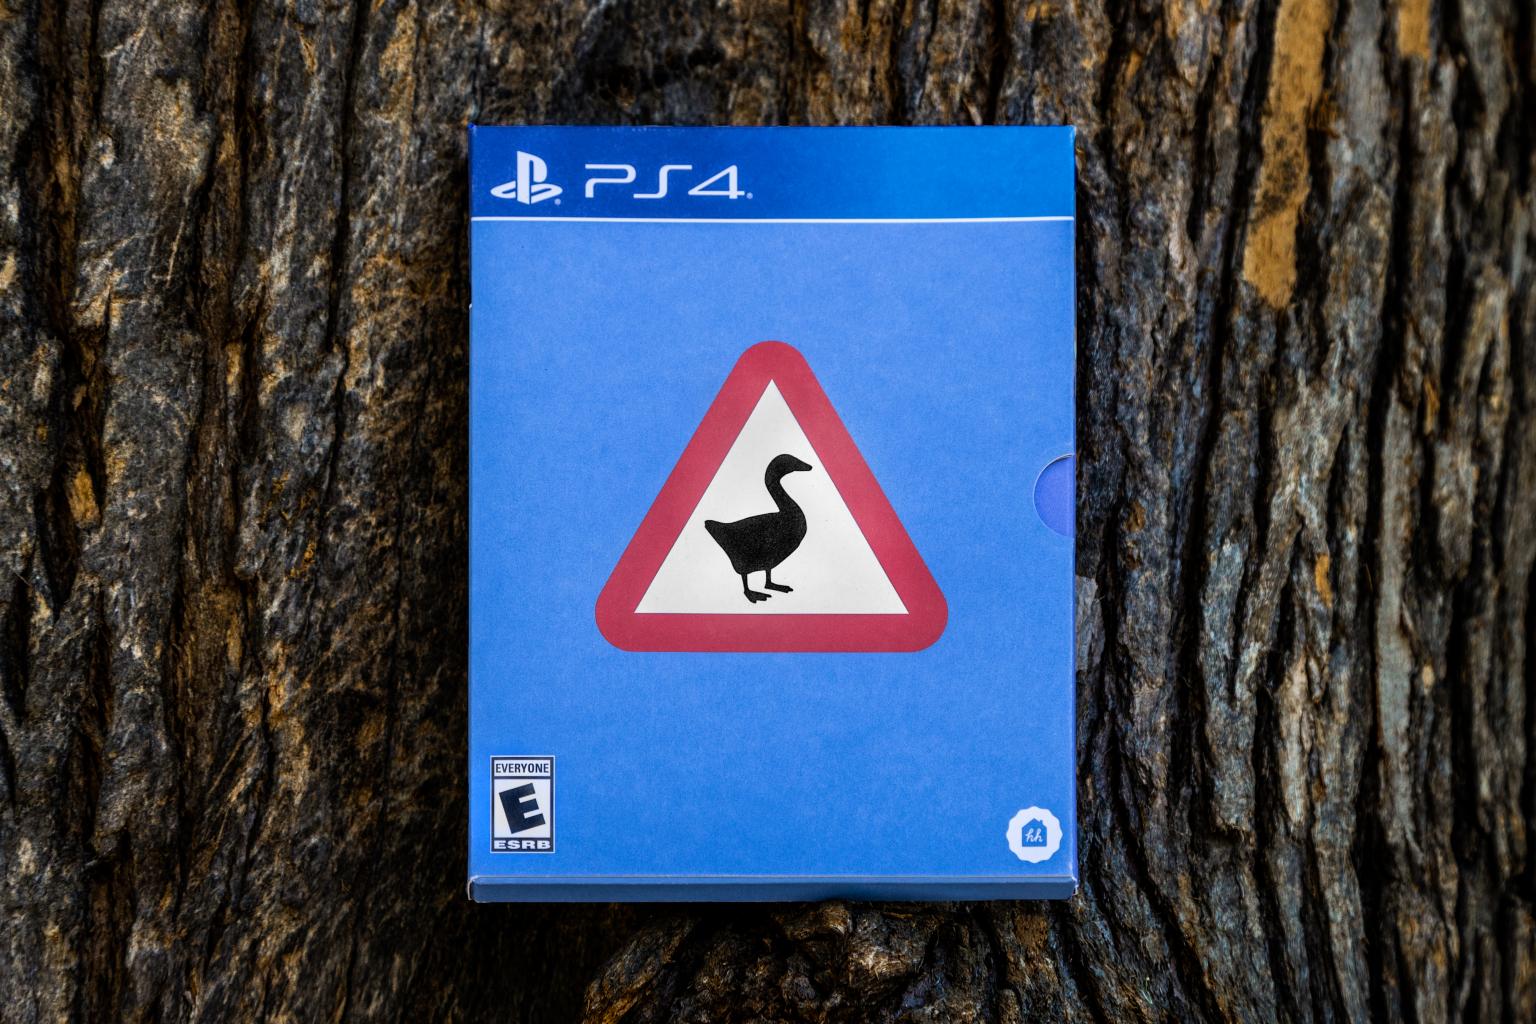 Top free physical games tagged untitled-goose-game 